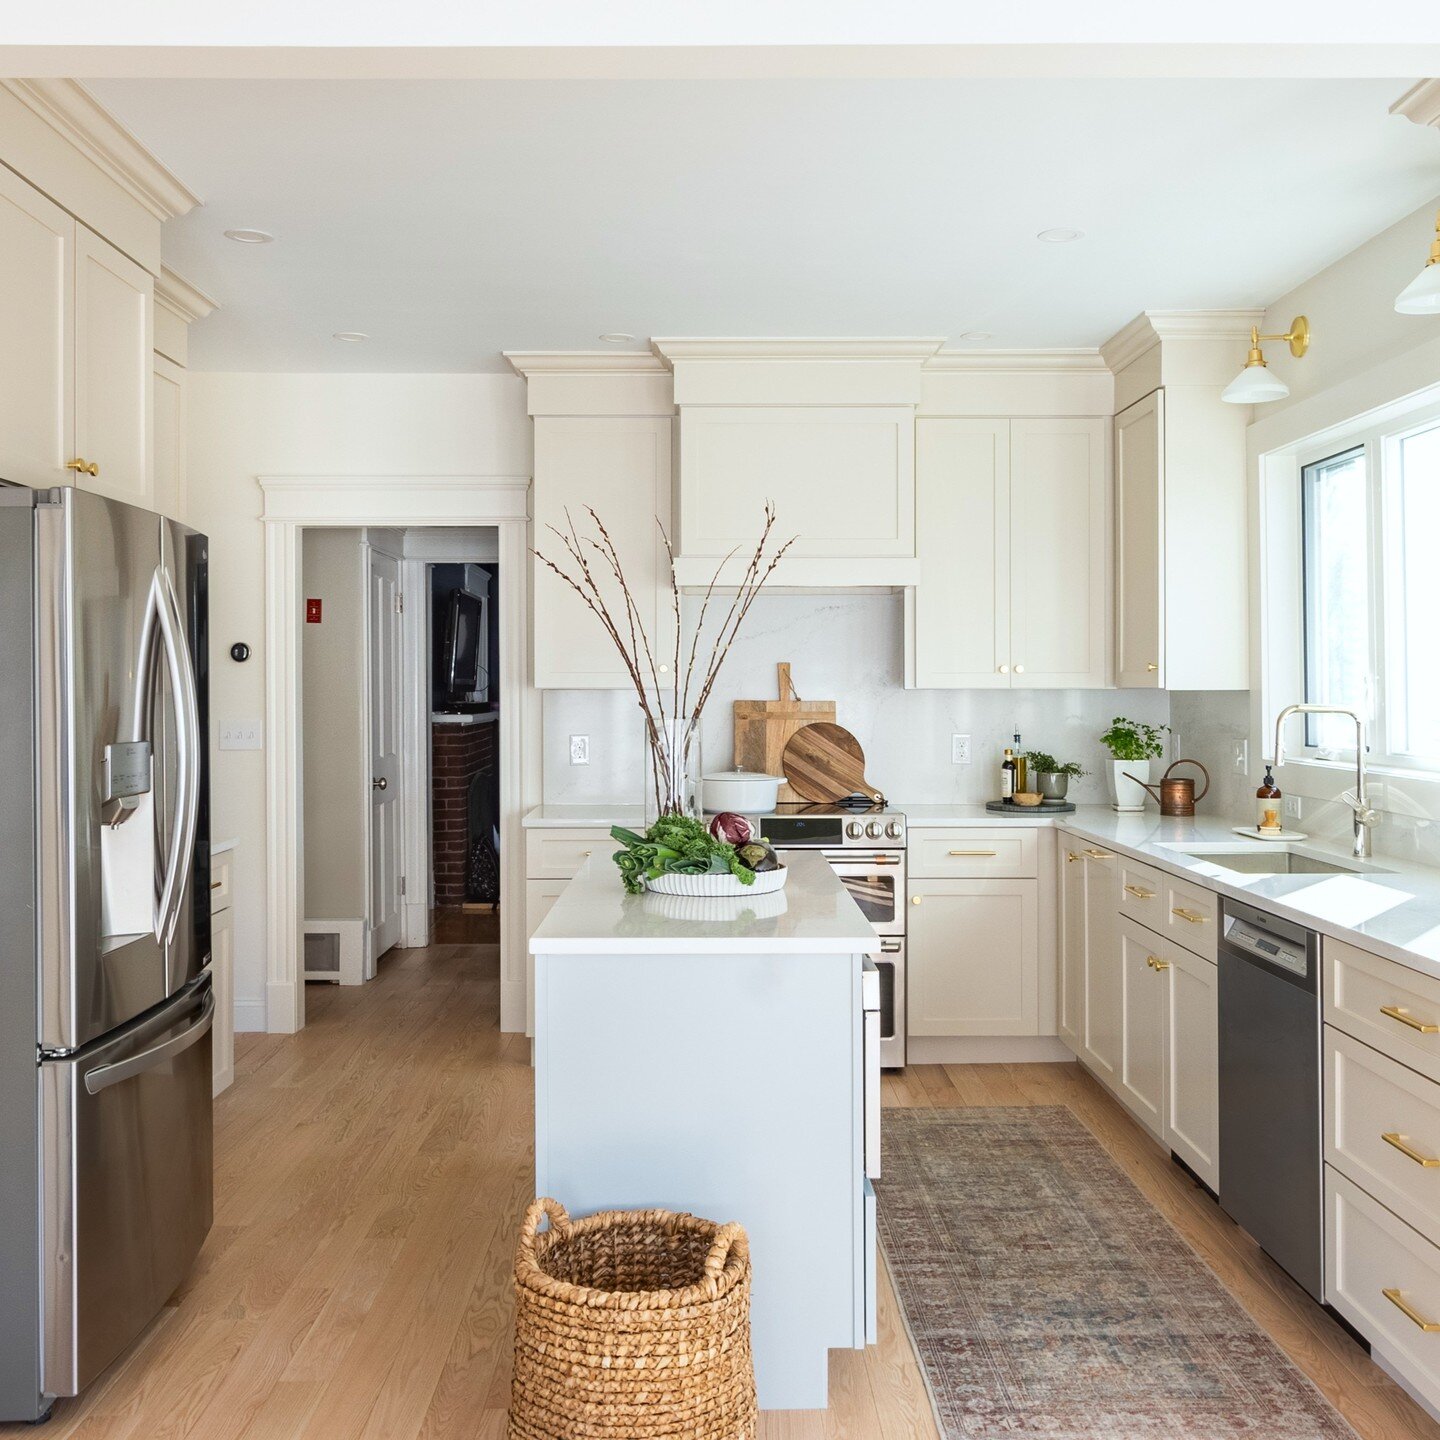 From chaotic and crowded to light, airy, and simplified. A soft palette and a few more feet of space (we raised the ceiling, pushed back the wall behind the fridge, and went for a much larger window) gave this kitchen new life. It's now a space that'